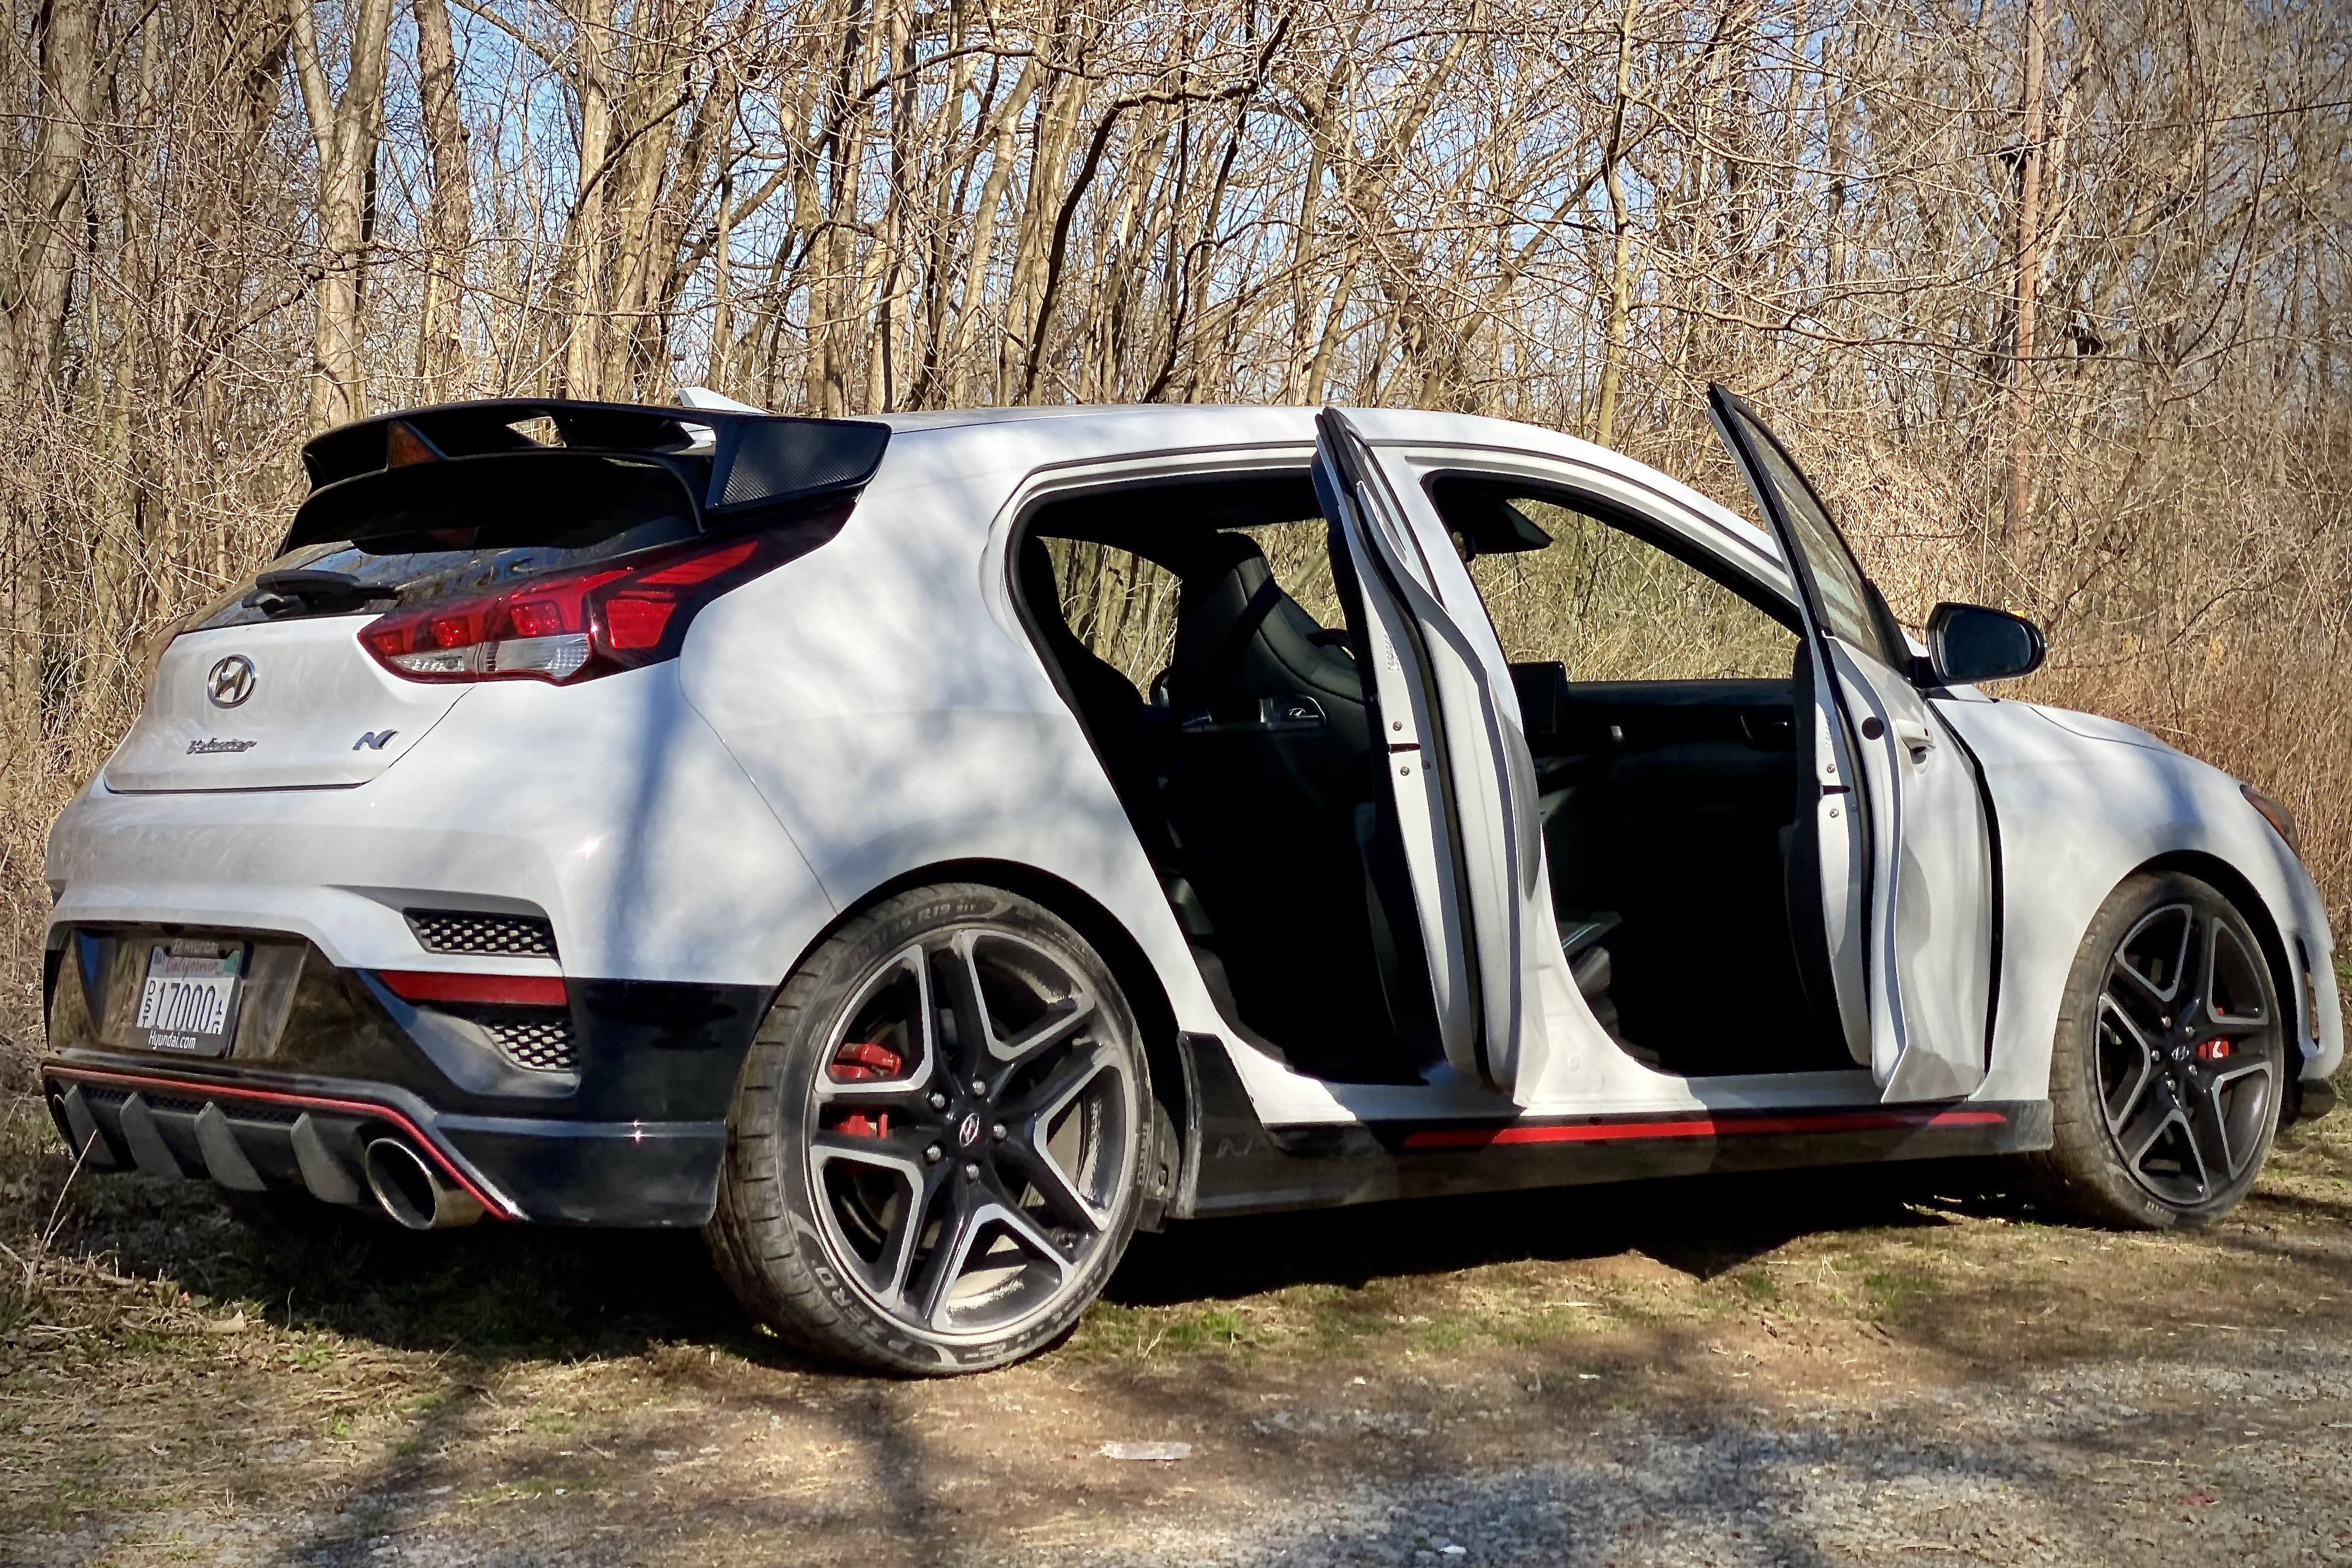 Hyundai Veloster N side profile with doors open from passenger side in front of trees.